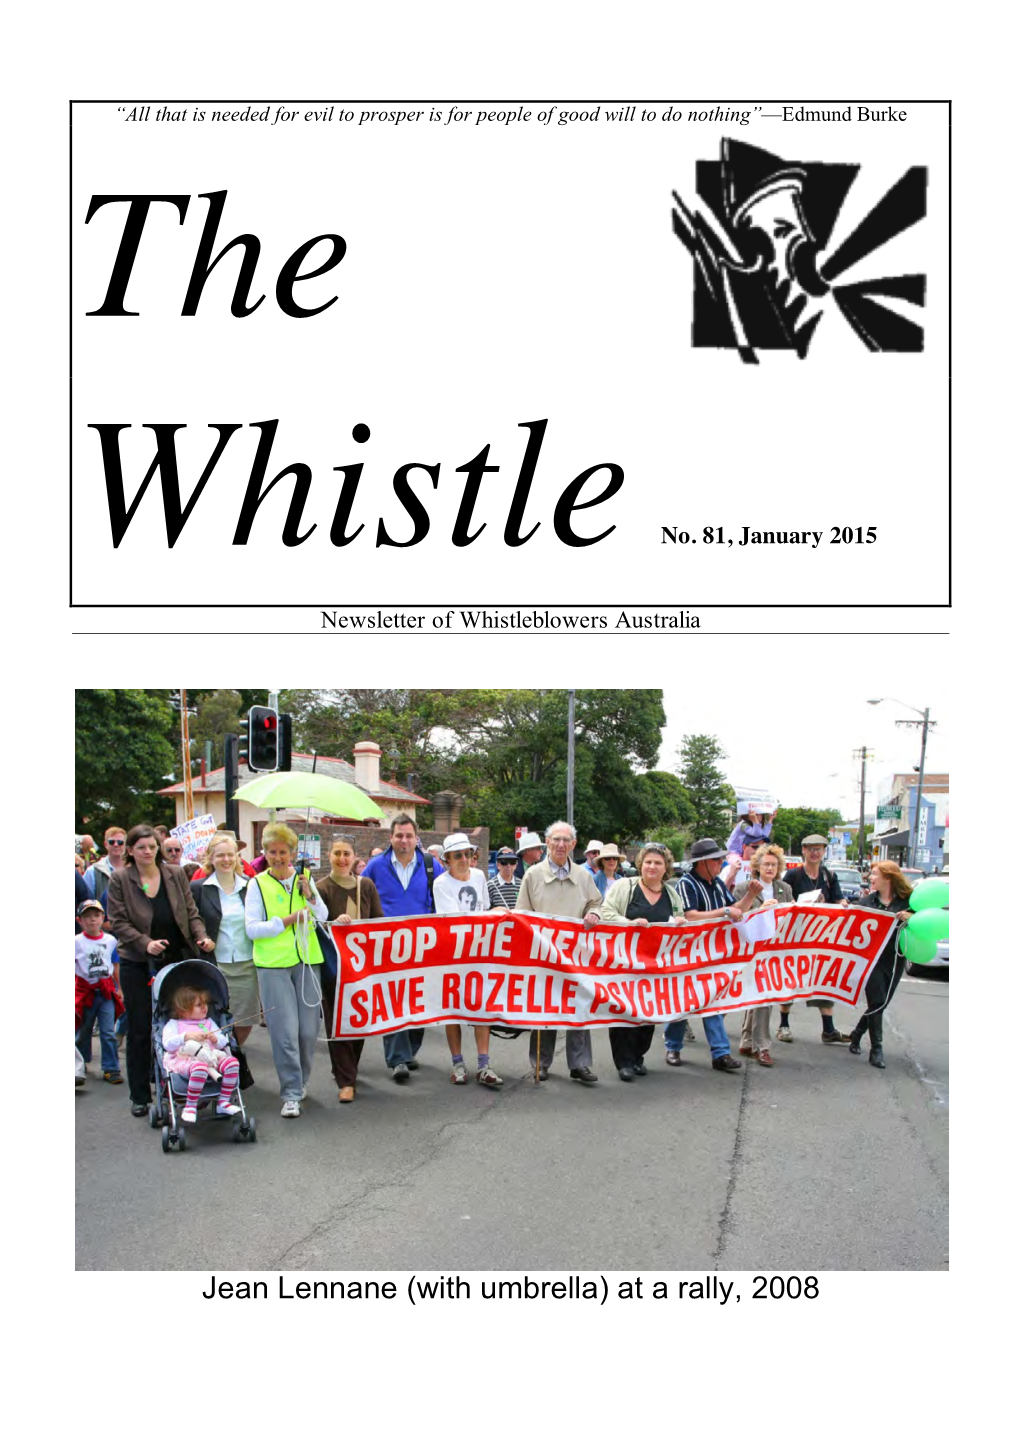 The Whistle, January 2015